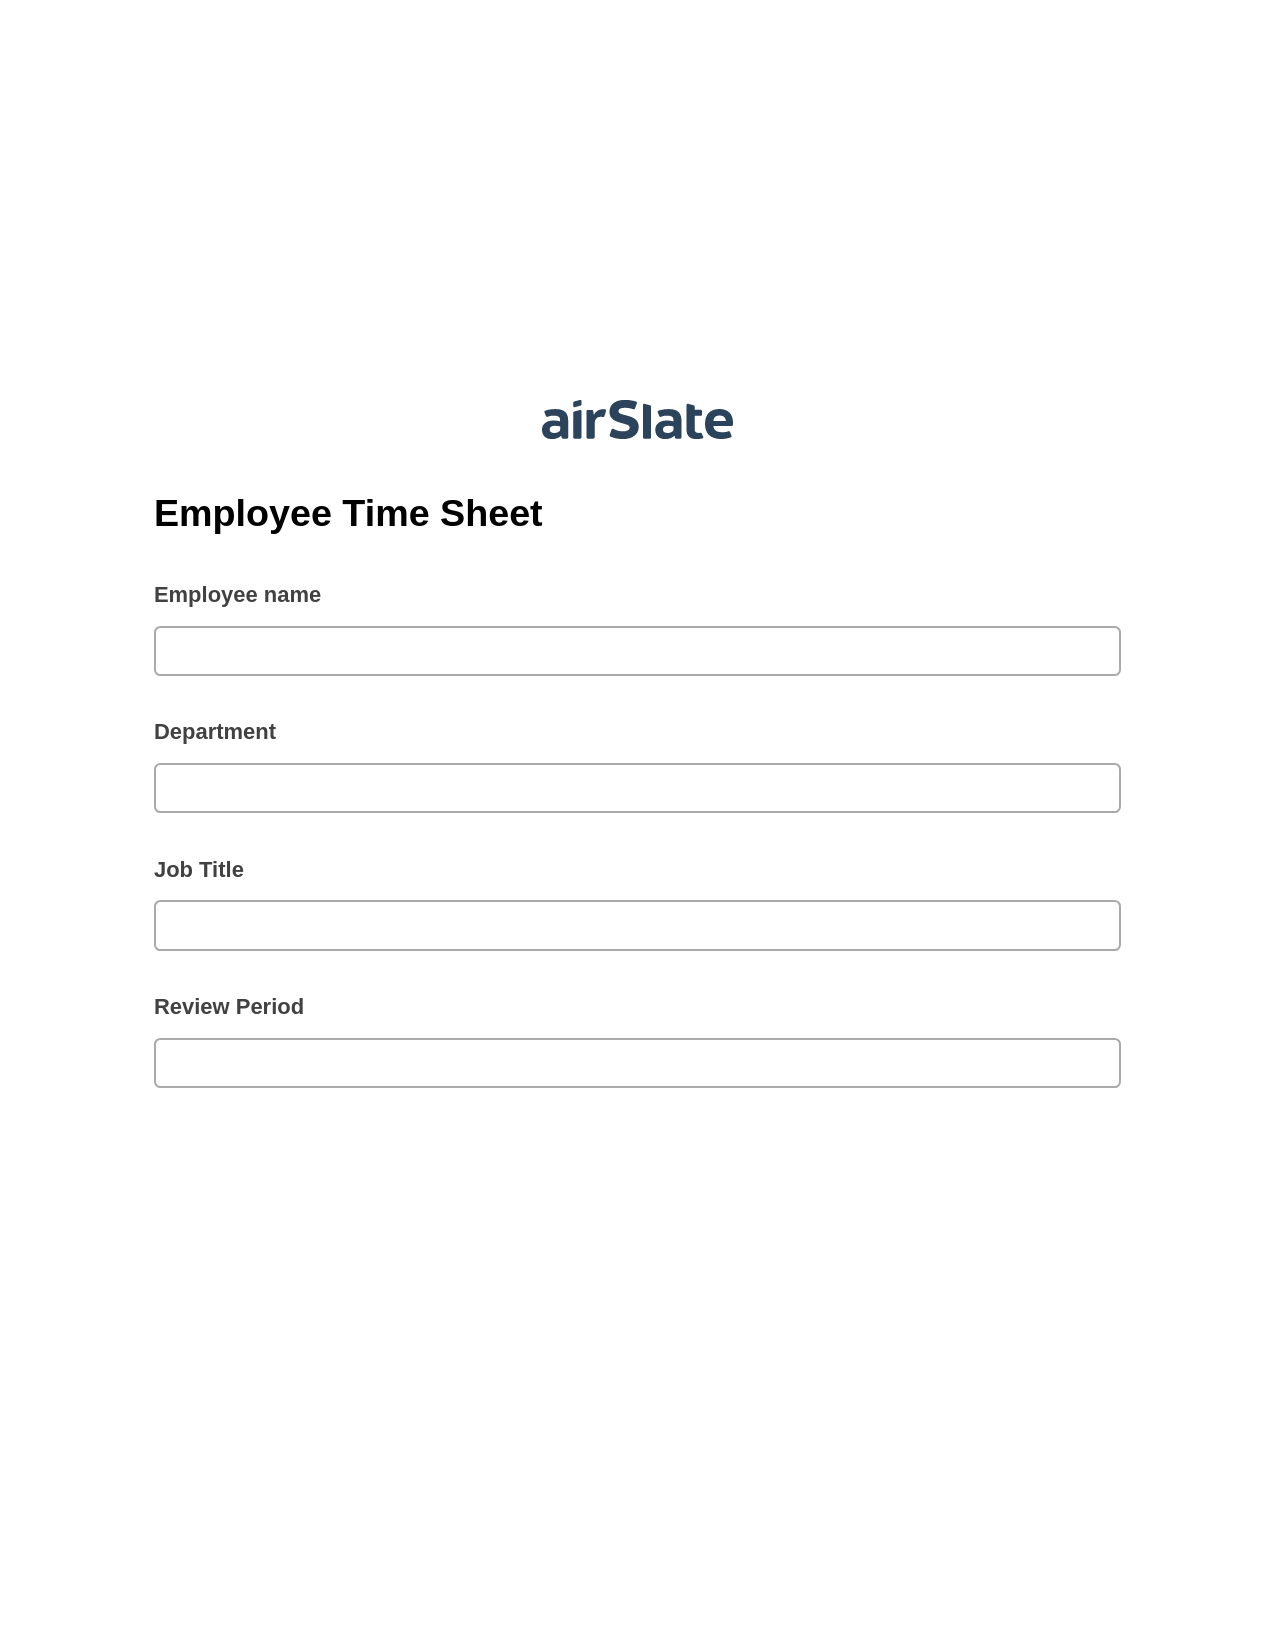 Employee Time Sheet Pre-fill Dropdowns from Excel Bot, Create Salesforce Records Bot, Archive to SharePoint Folder Bot